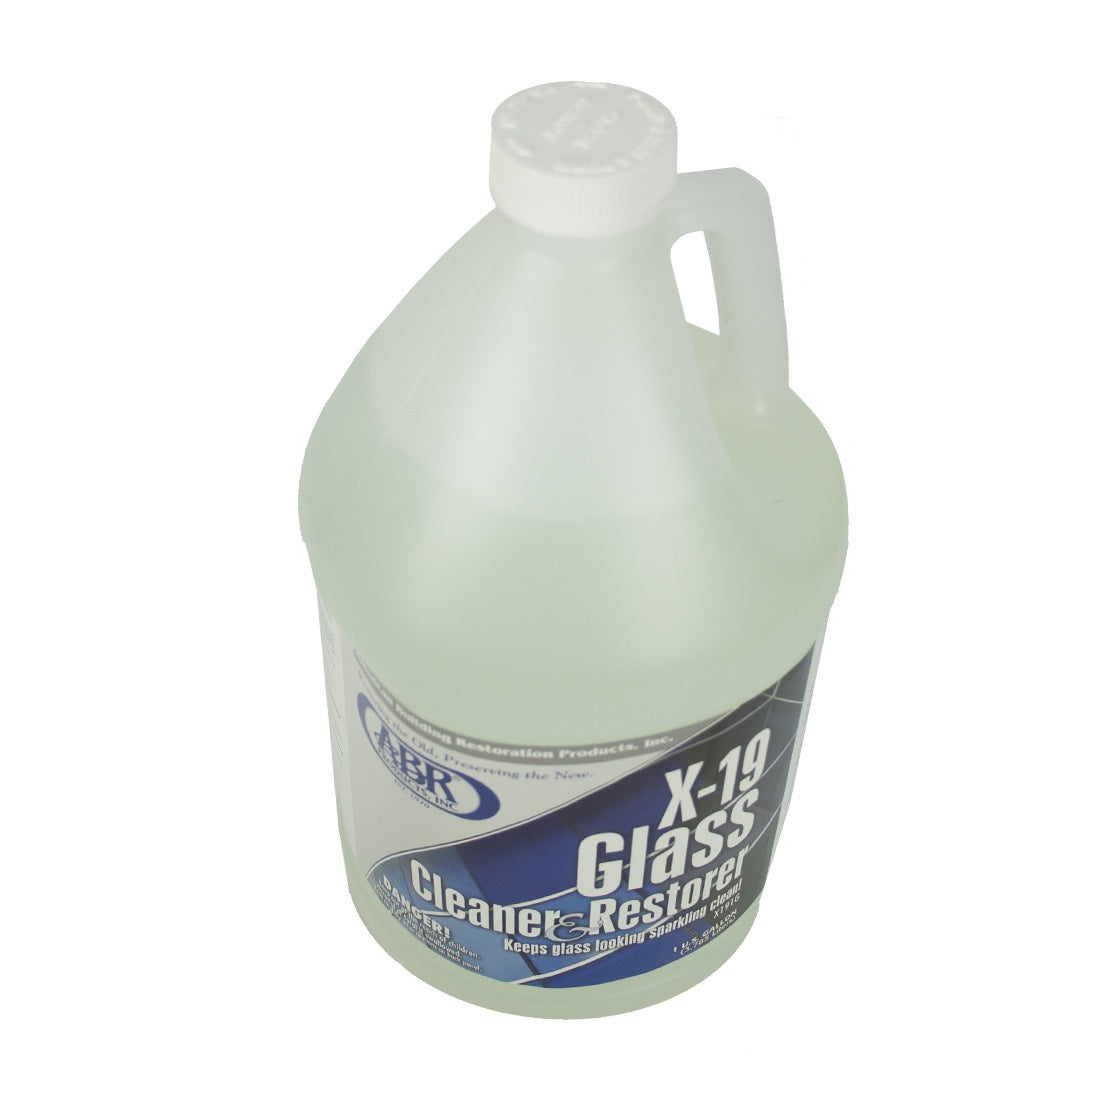 American Building Restoration X-19 Glass Cleaner and Restorer Oblique Top View